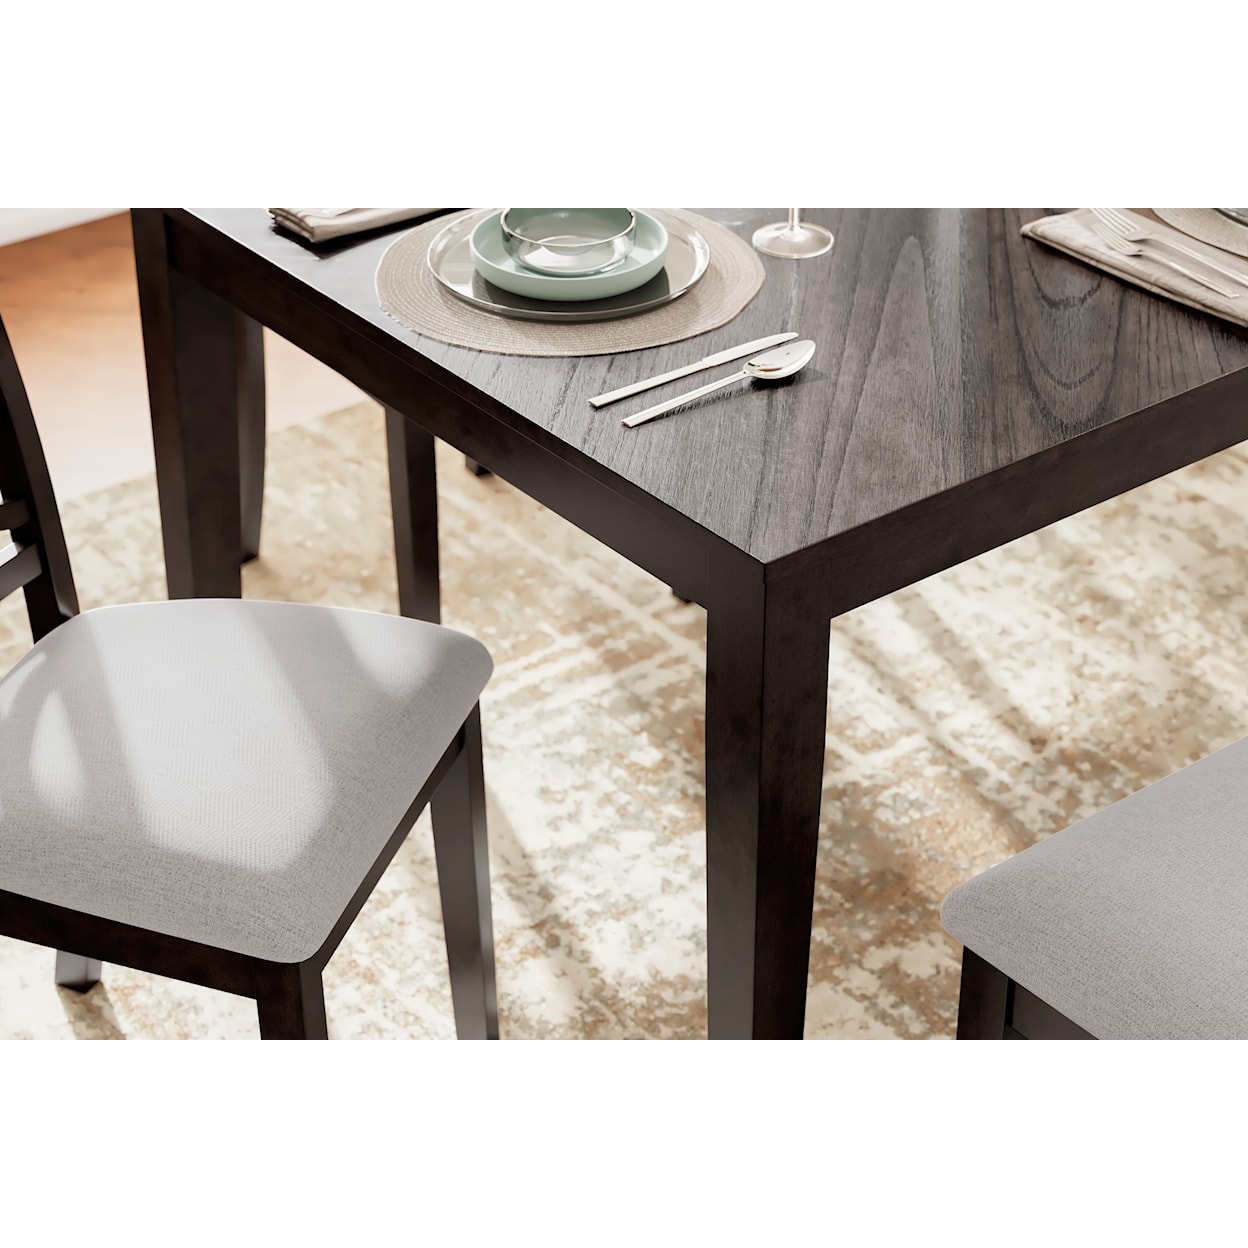 Signature Design by Ashley Langwest Dining Room Table Set